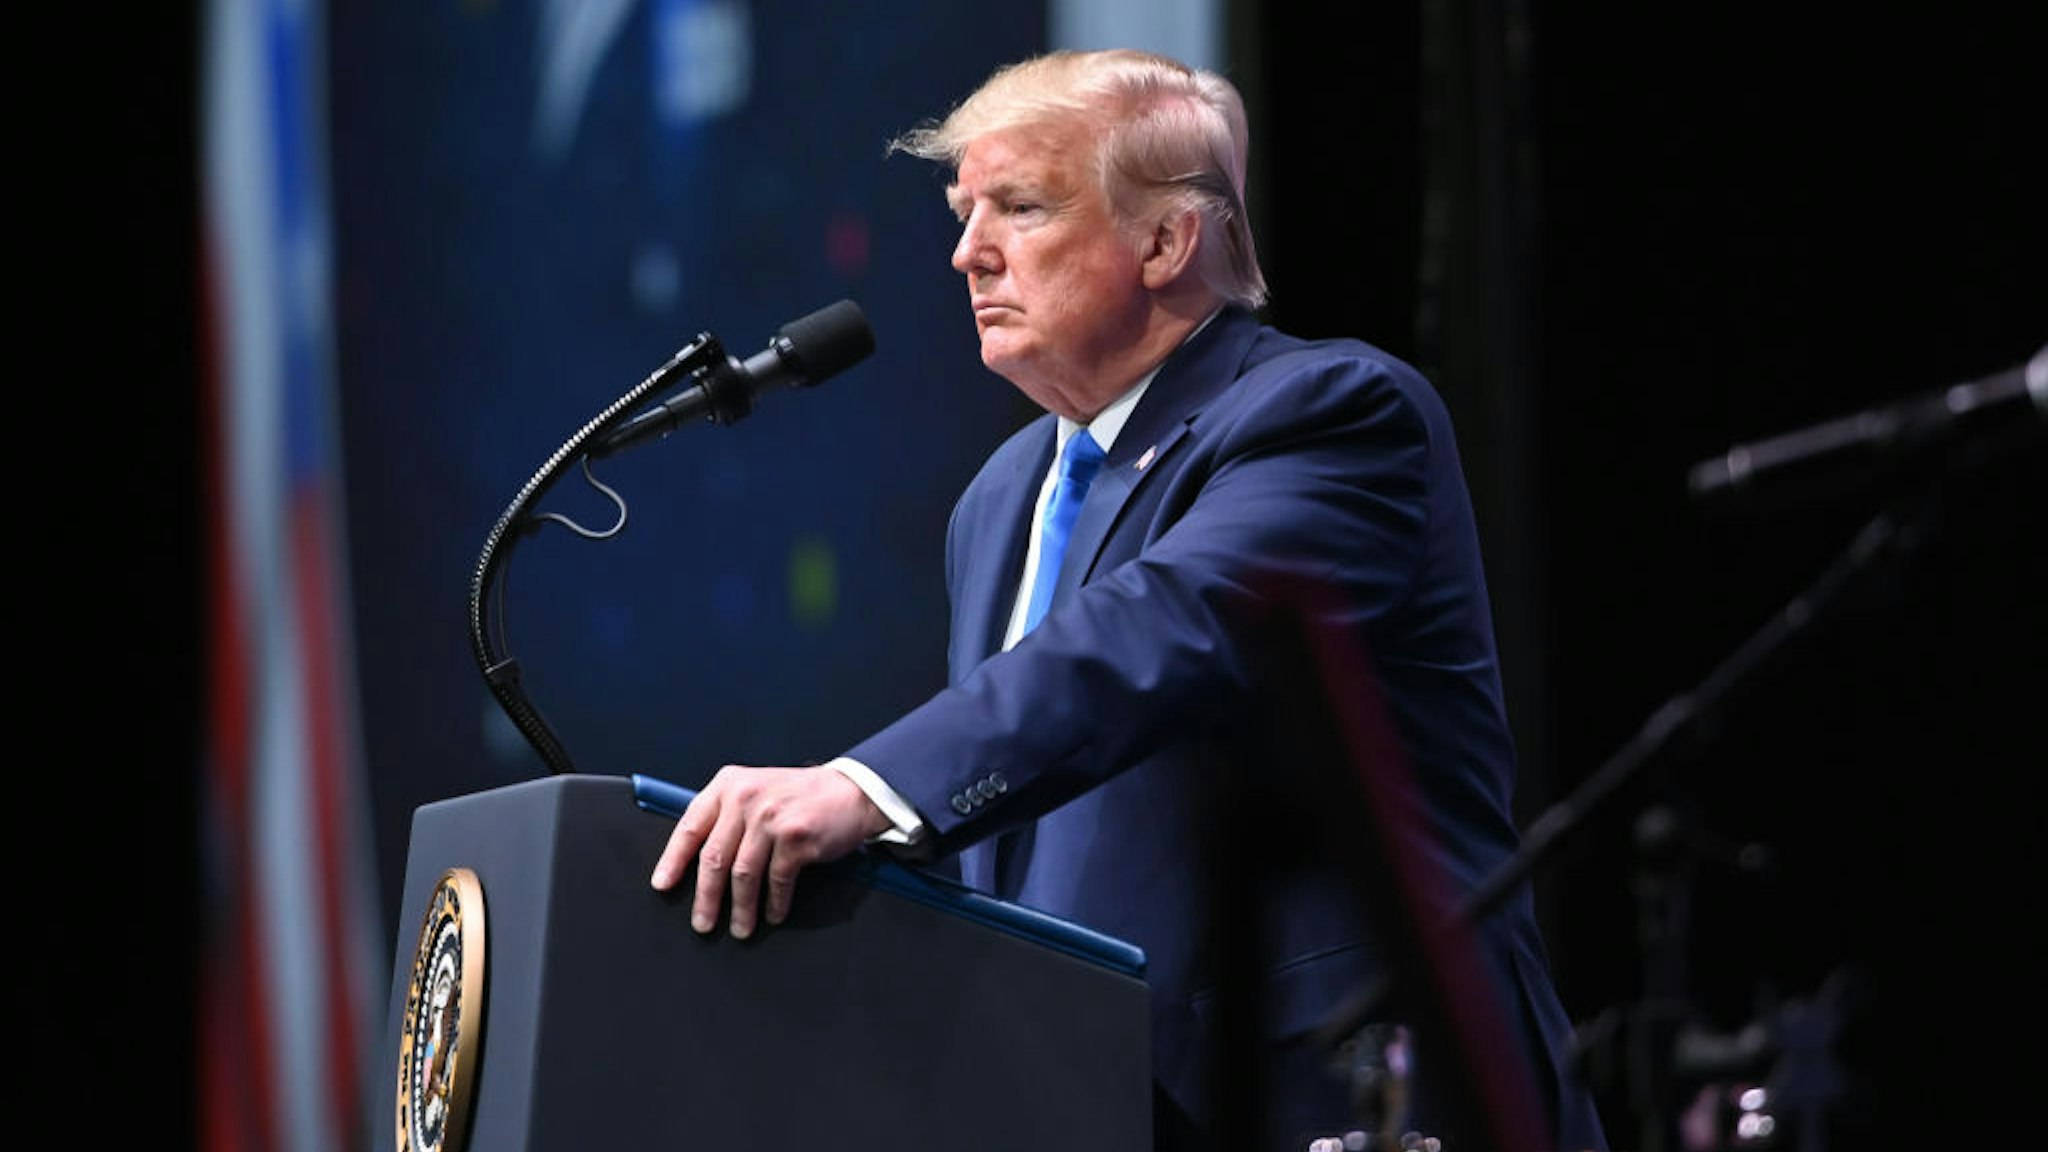 President Donald Trump speaks at the Israeli American Council National Summit on December 07, 2019 in Hollywood, Florida.